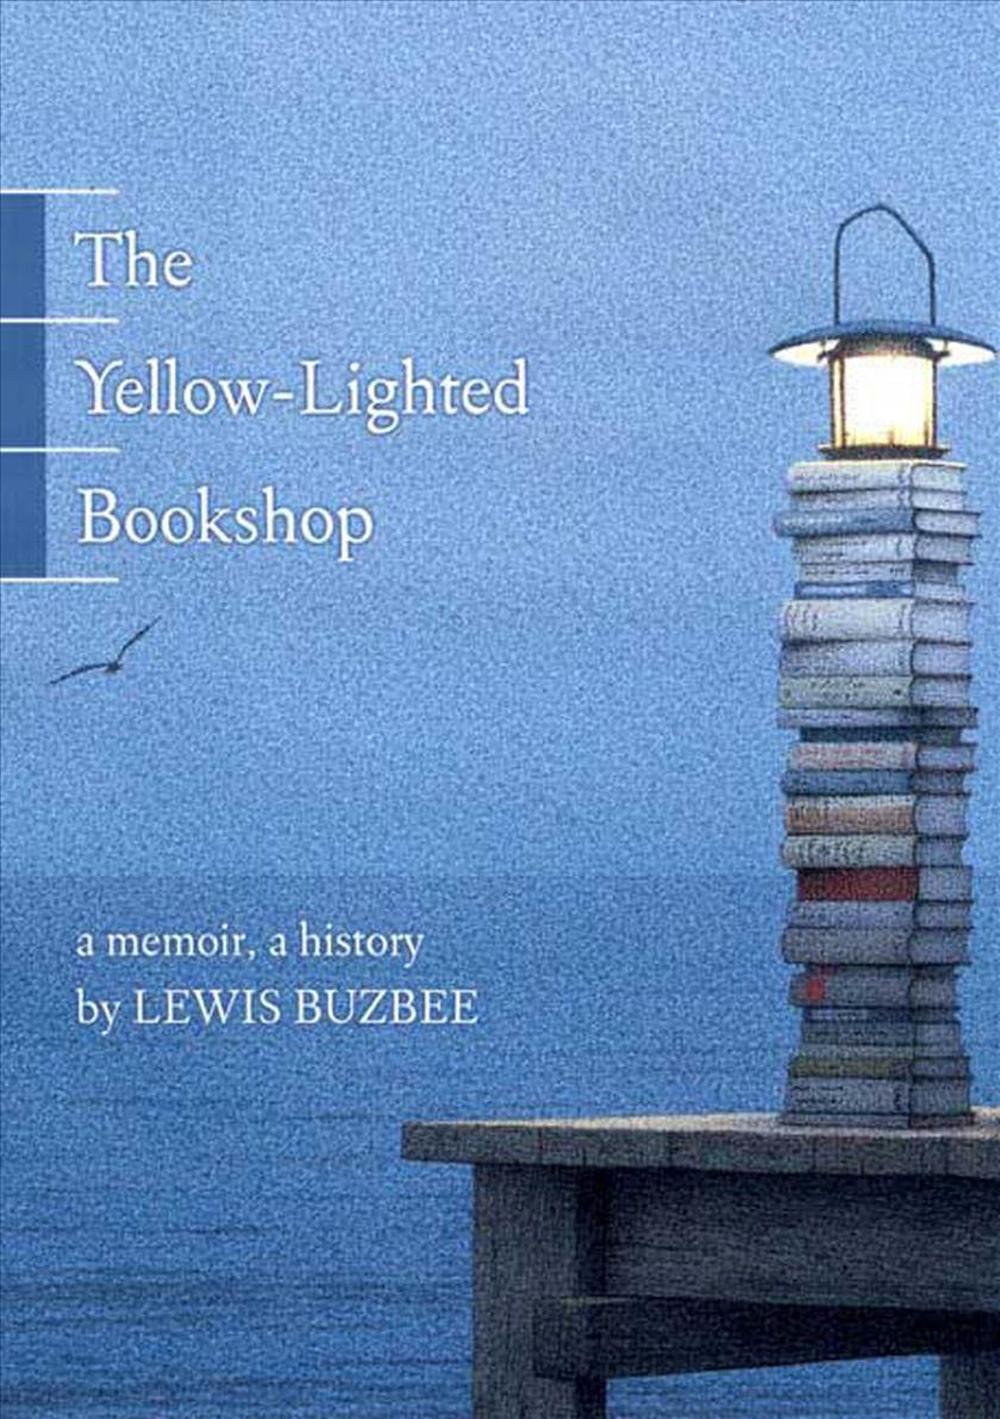 The YellowLighted A Memoir, a History by Lewis Buzbee